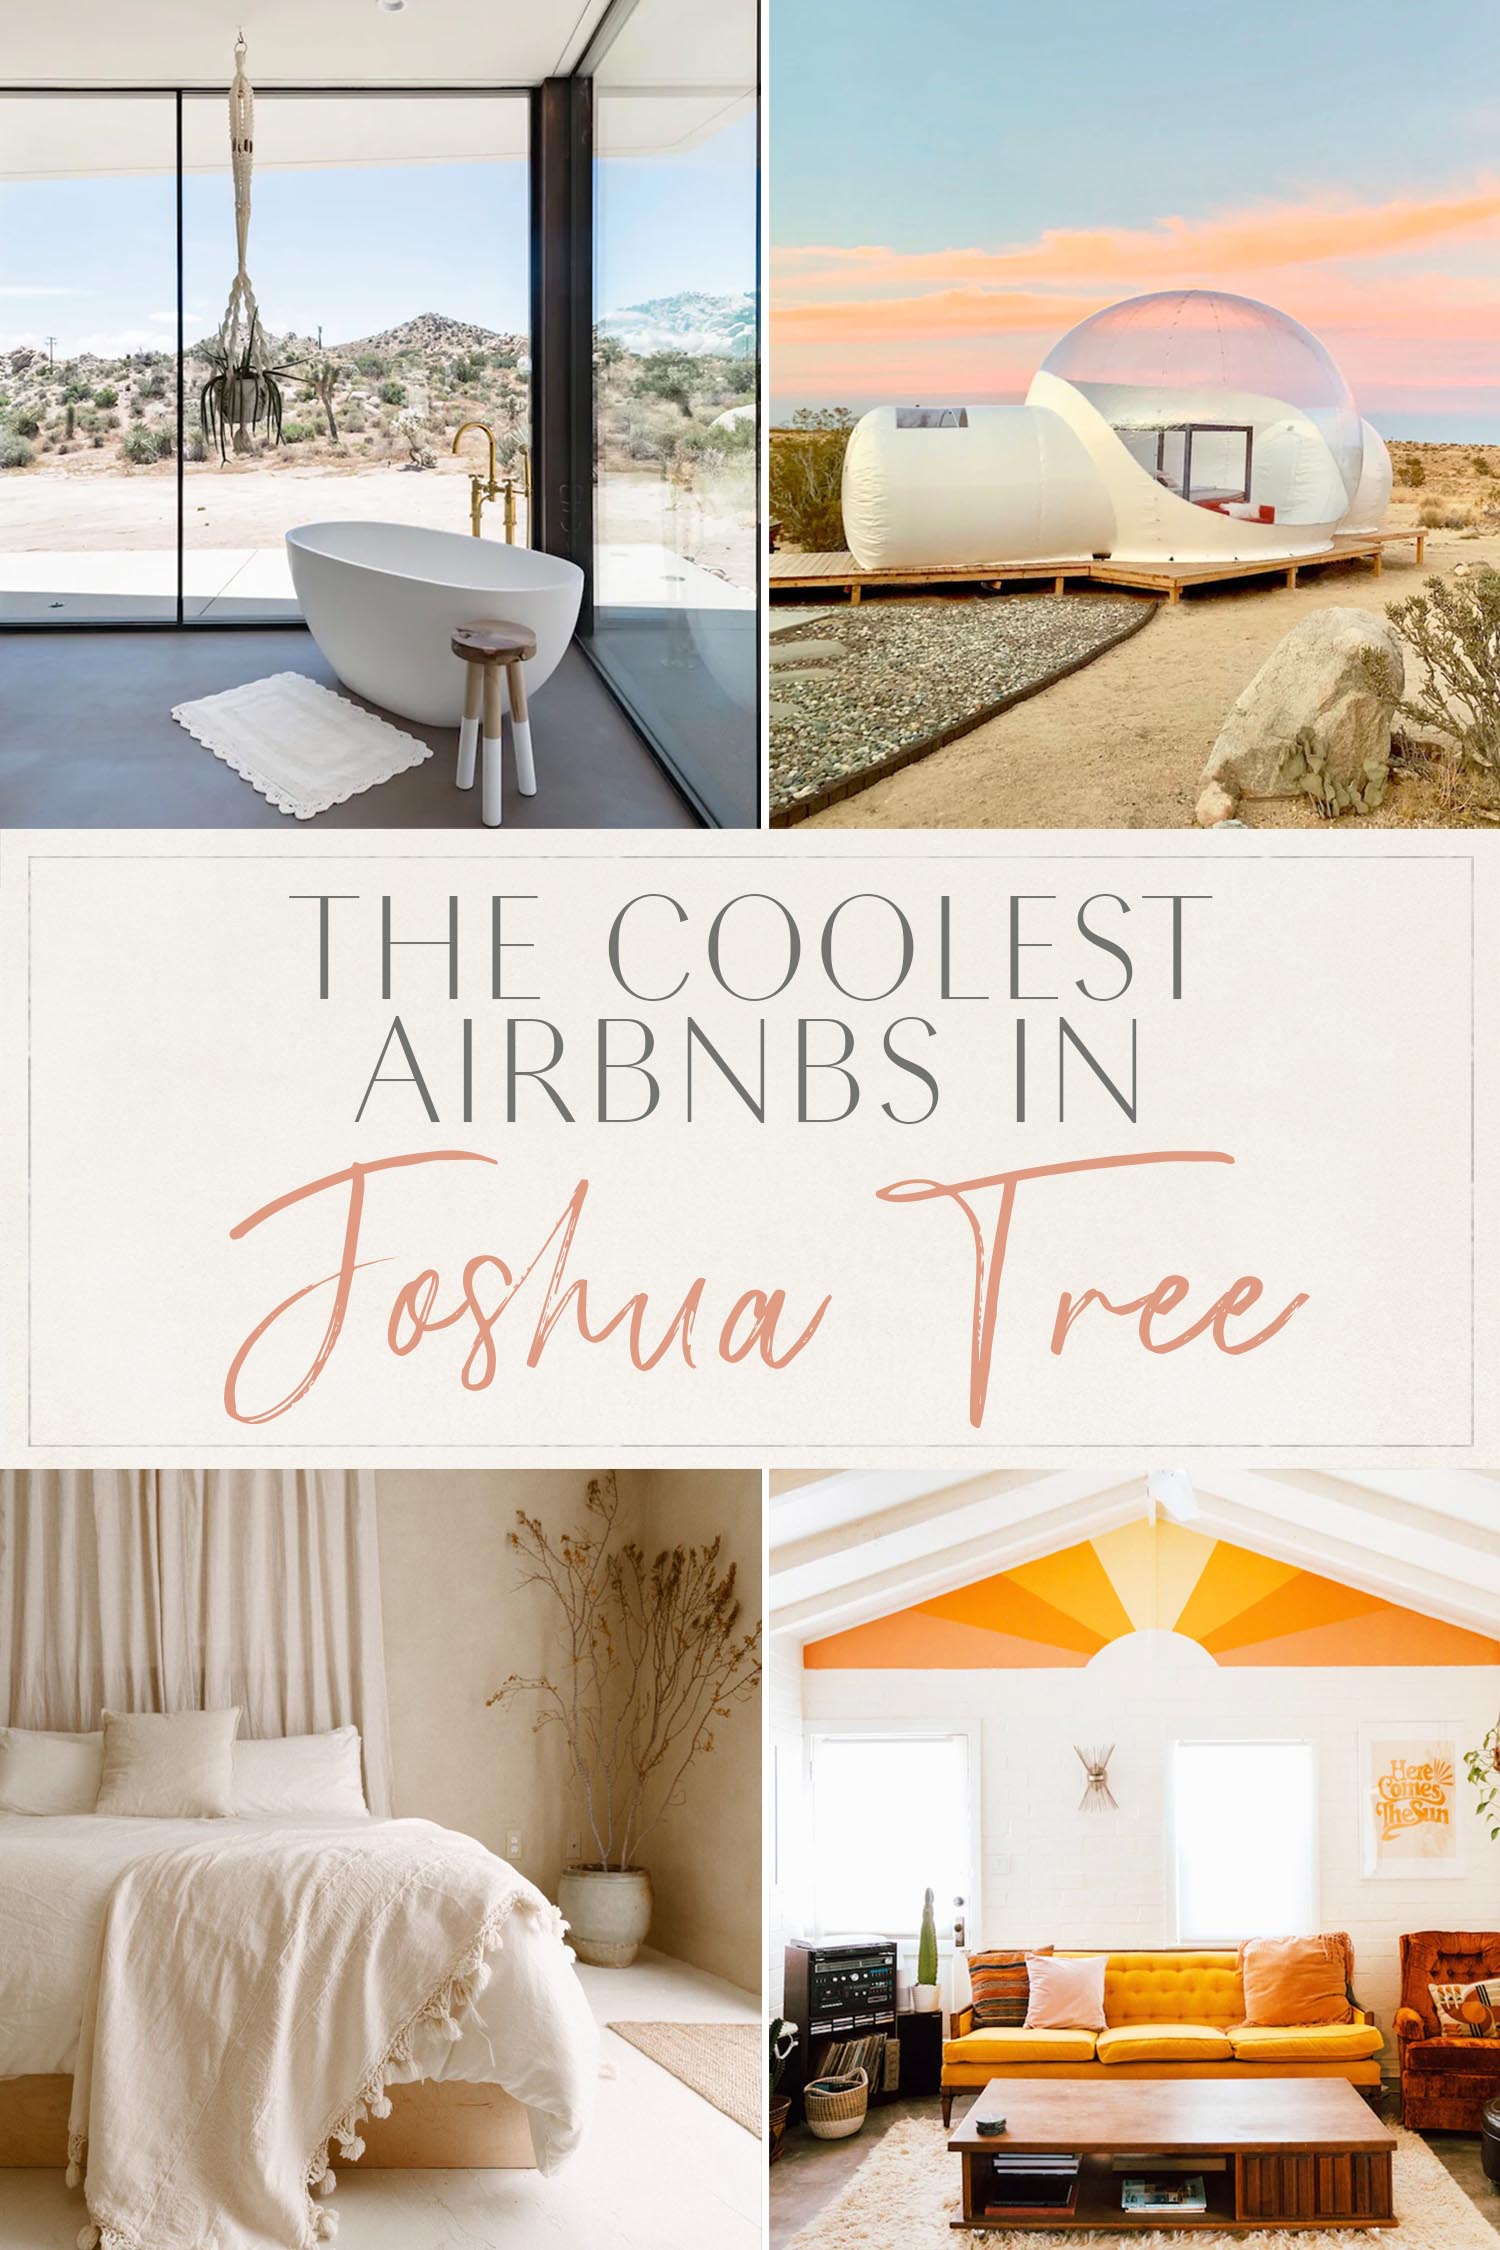 Coolest Airbnbs in Joshua Tree